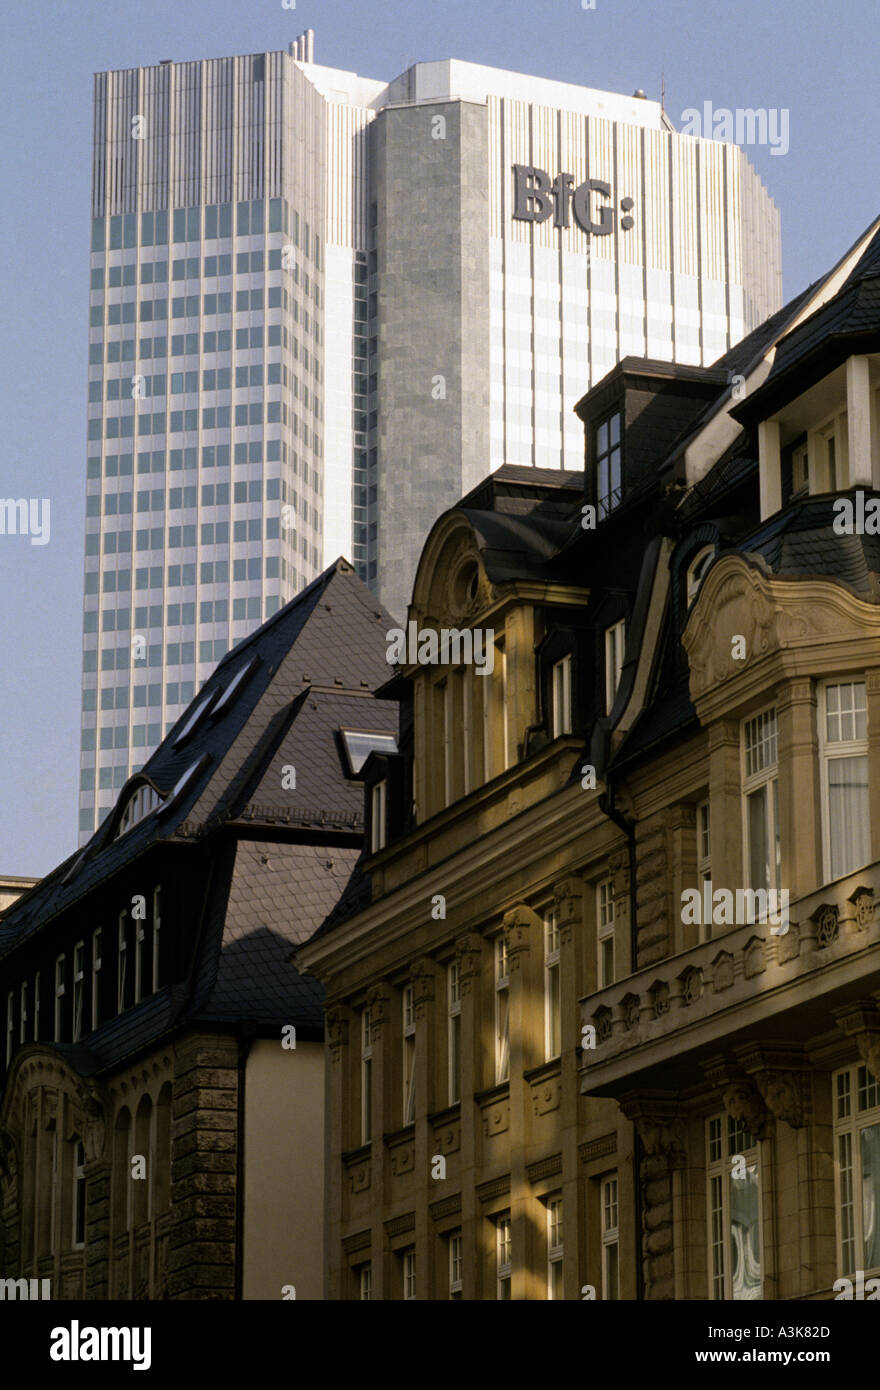 The headquarters of the BfG Bank tower over old buildings in the financial district of Frankfurt Germany Stock Photo